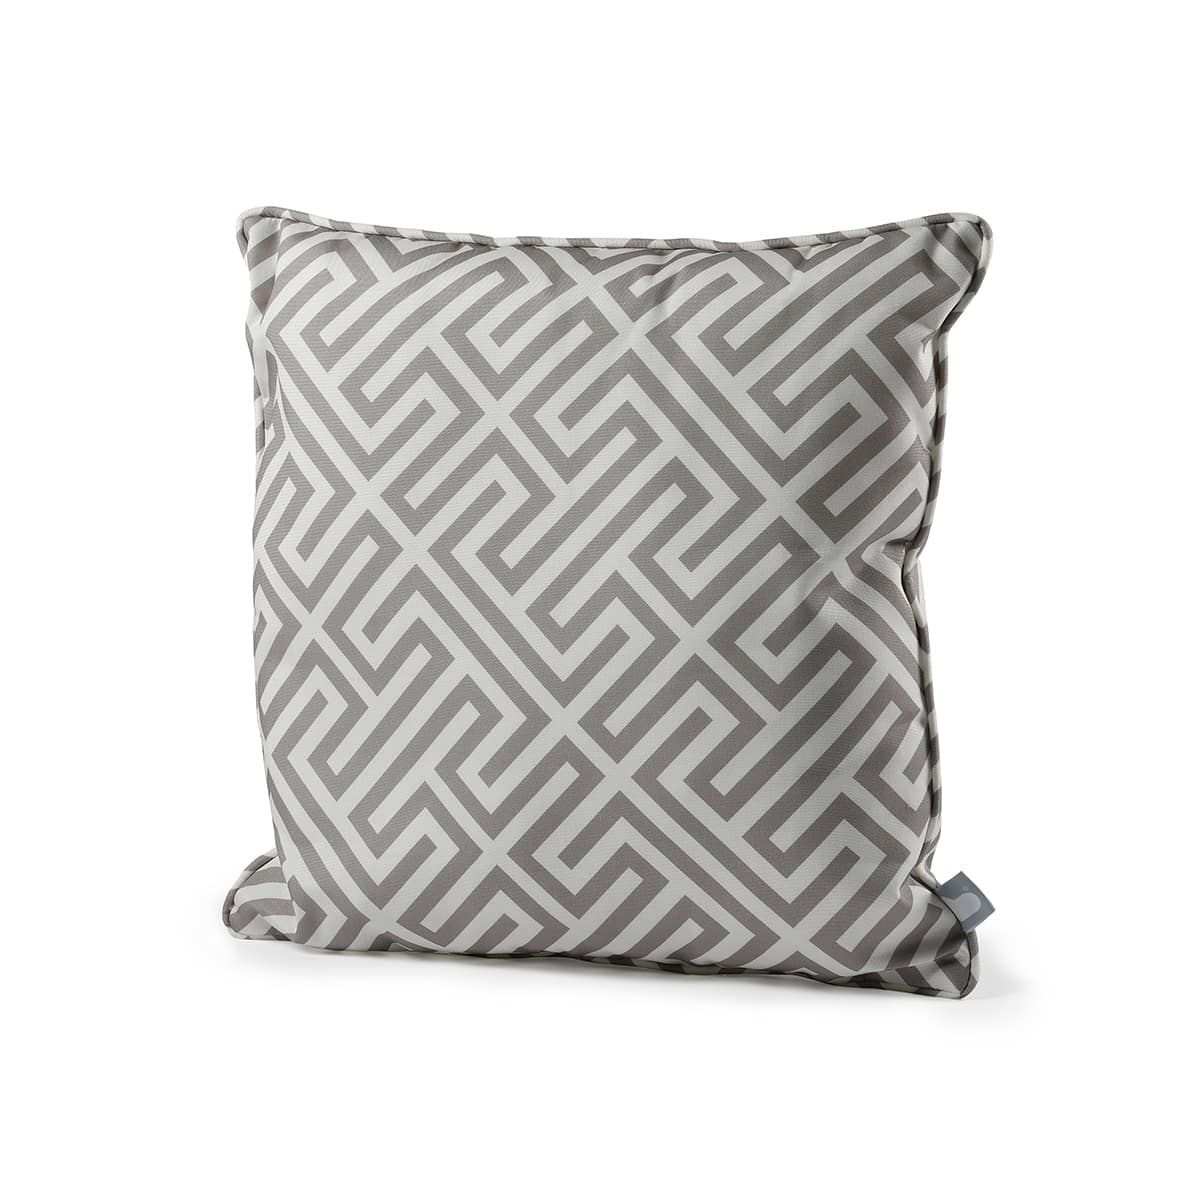 Maze - Pair Of Outdoor Scatter Cushion (50x50cm) - Silver Grey product image